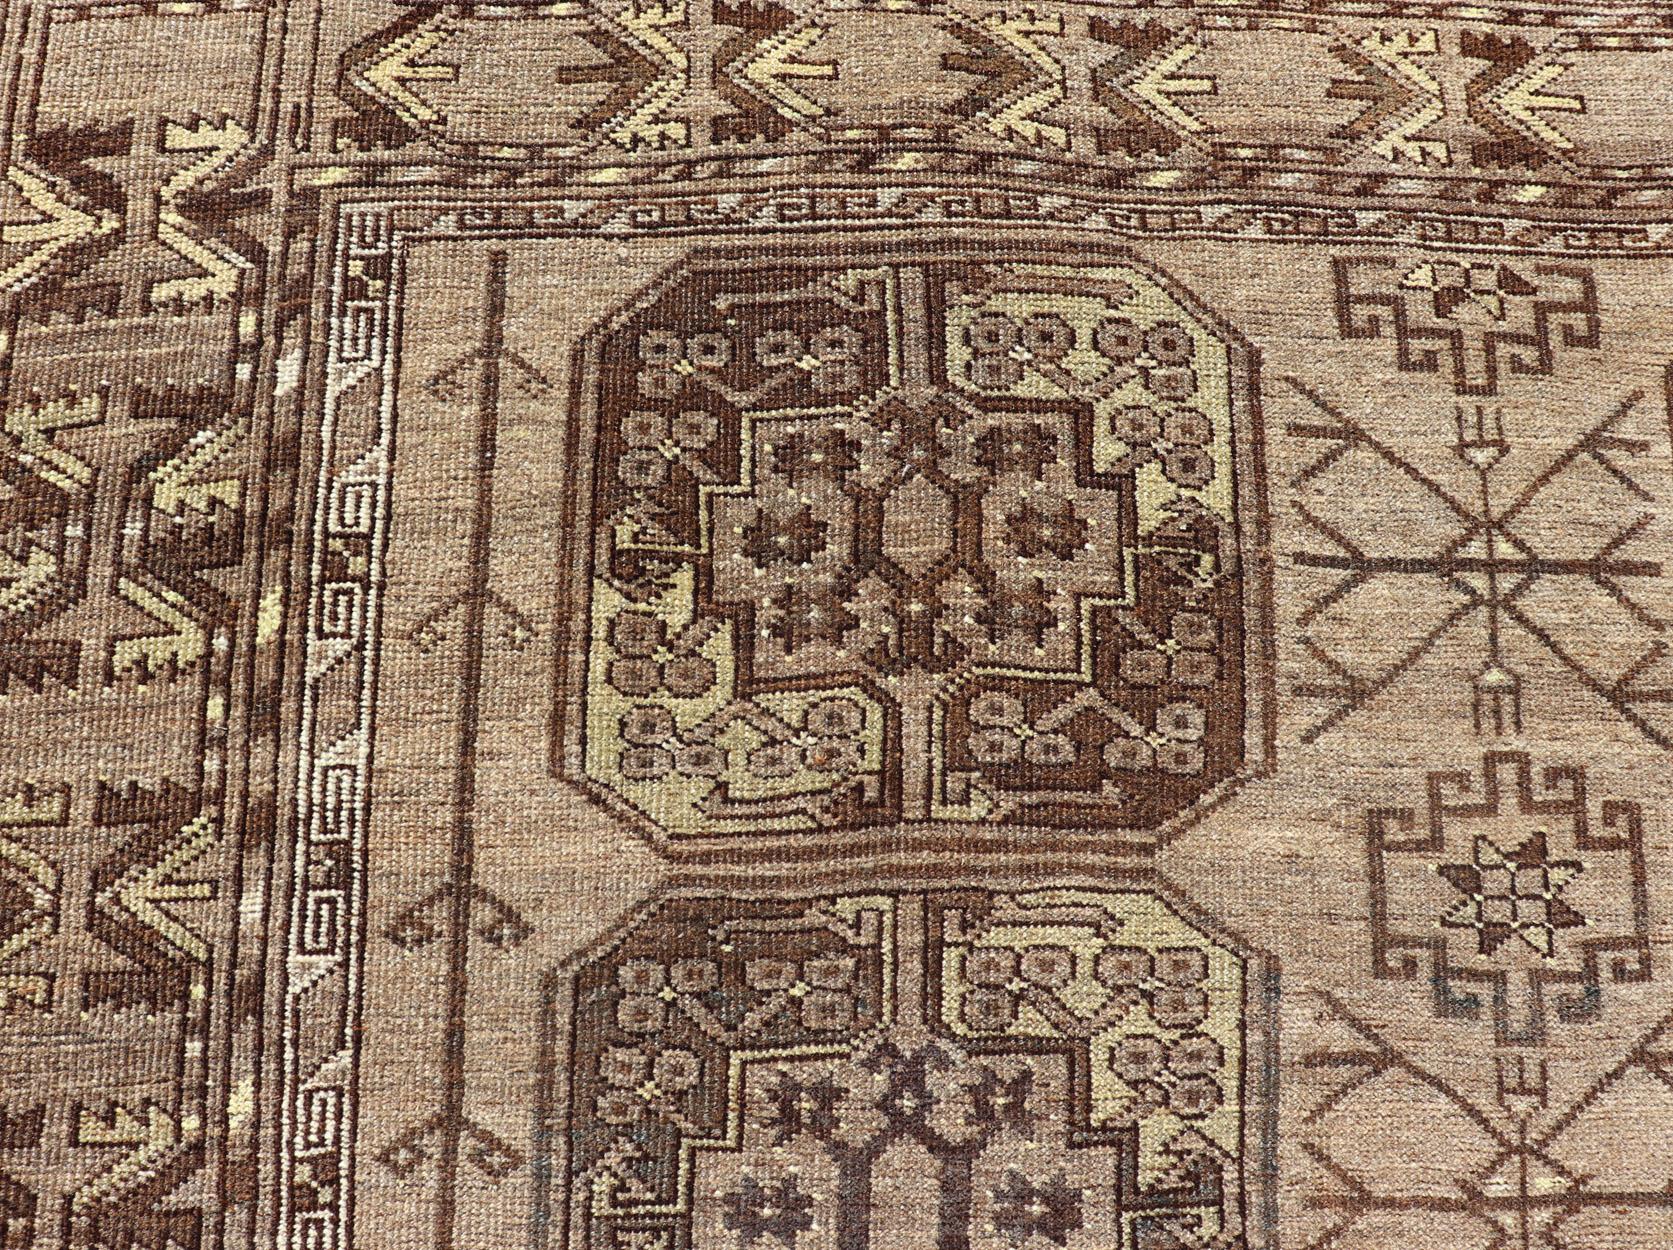 Hand-Knotted Turkomen Ersari Rug in Wool with Repeating Sub-Geometric Gul Design For Sale 4